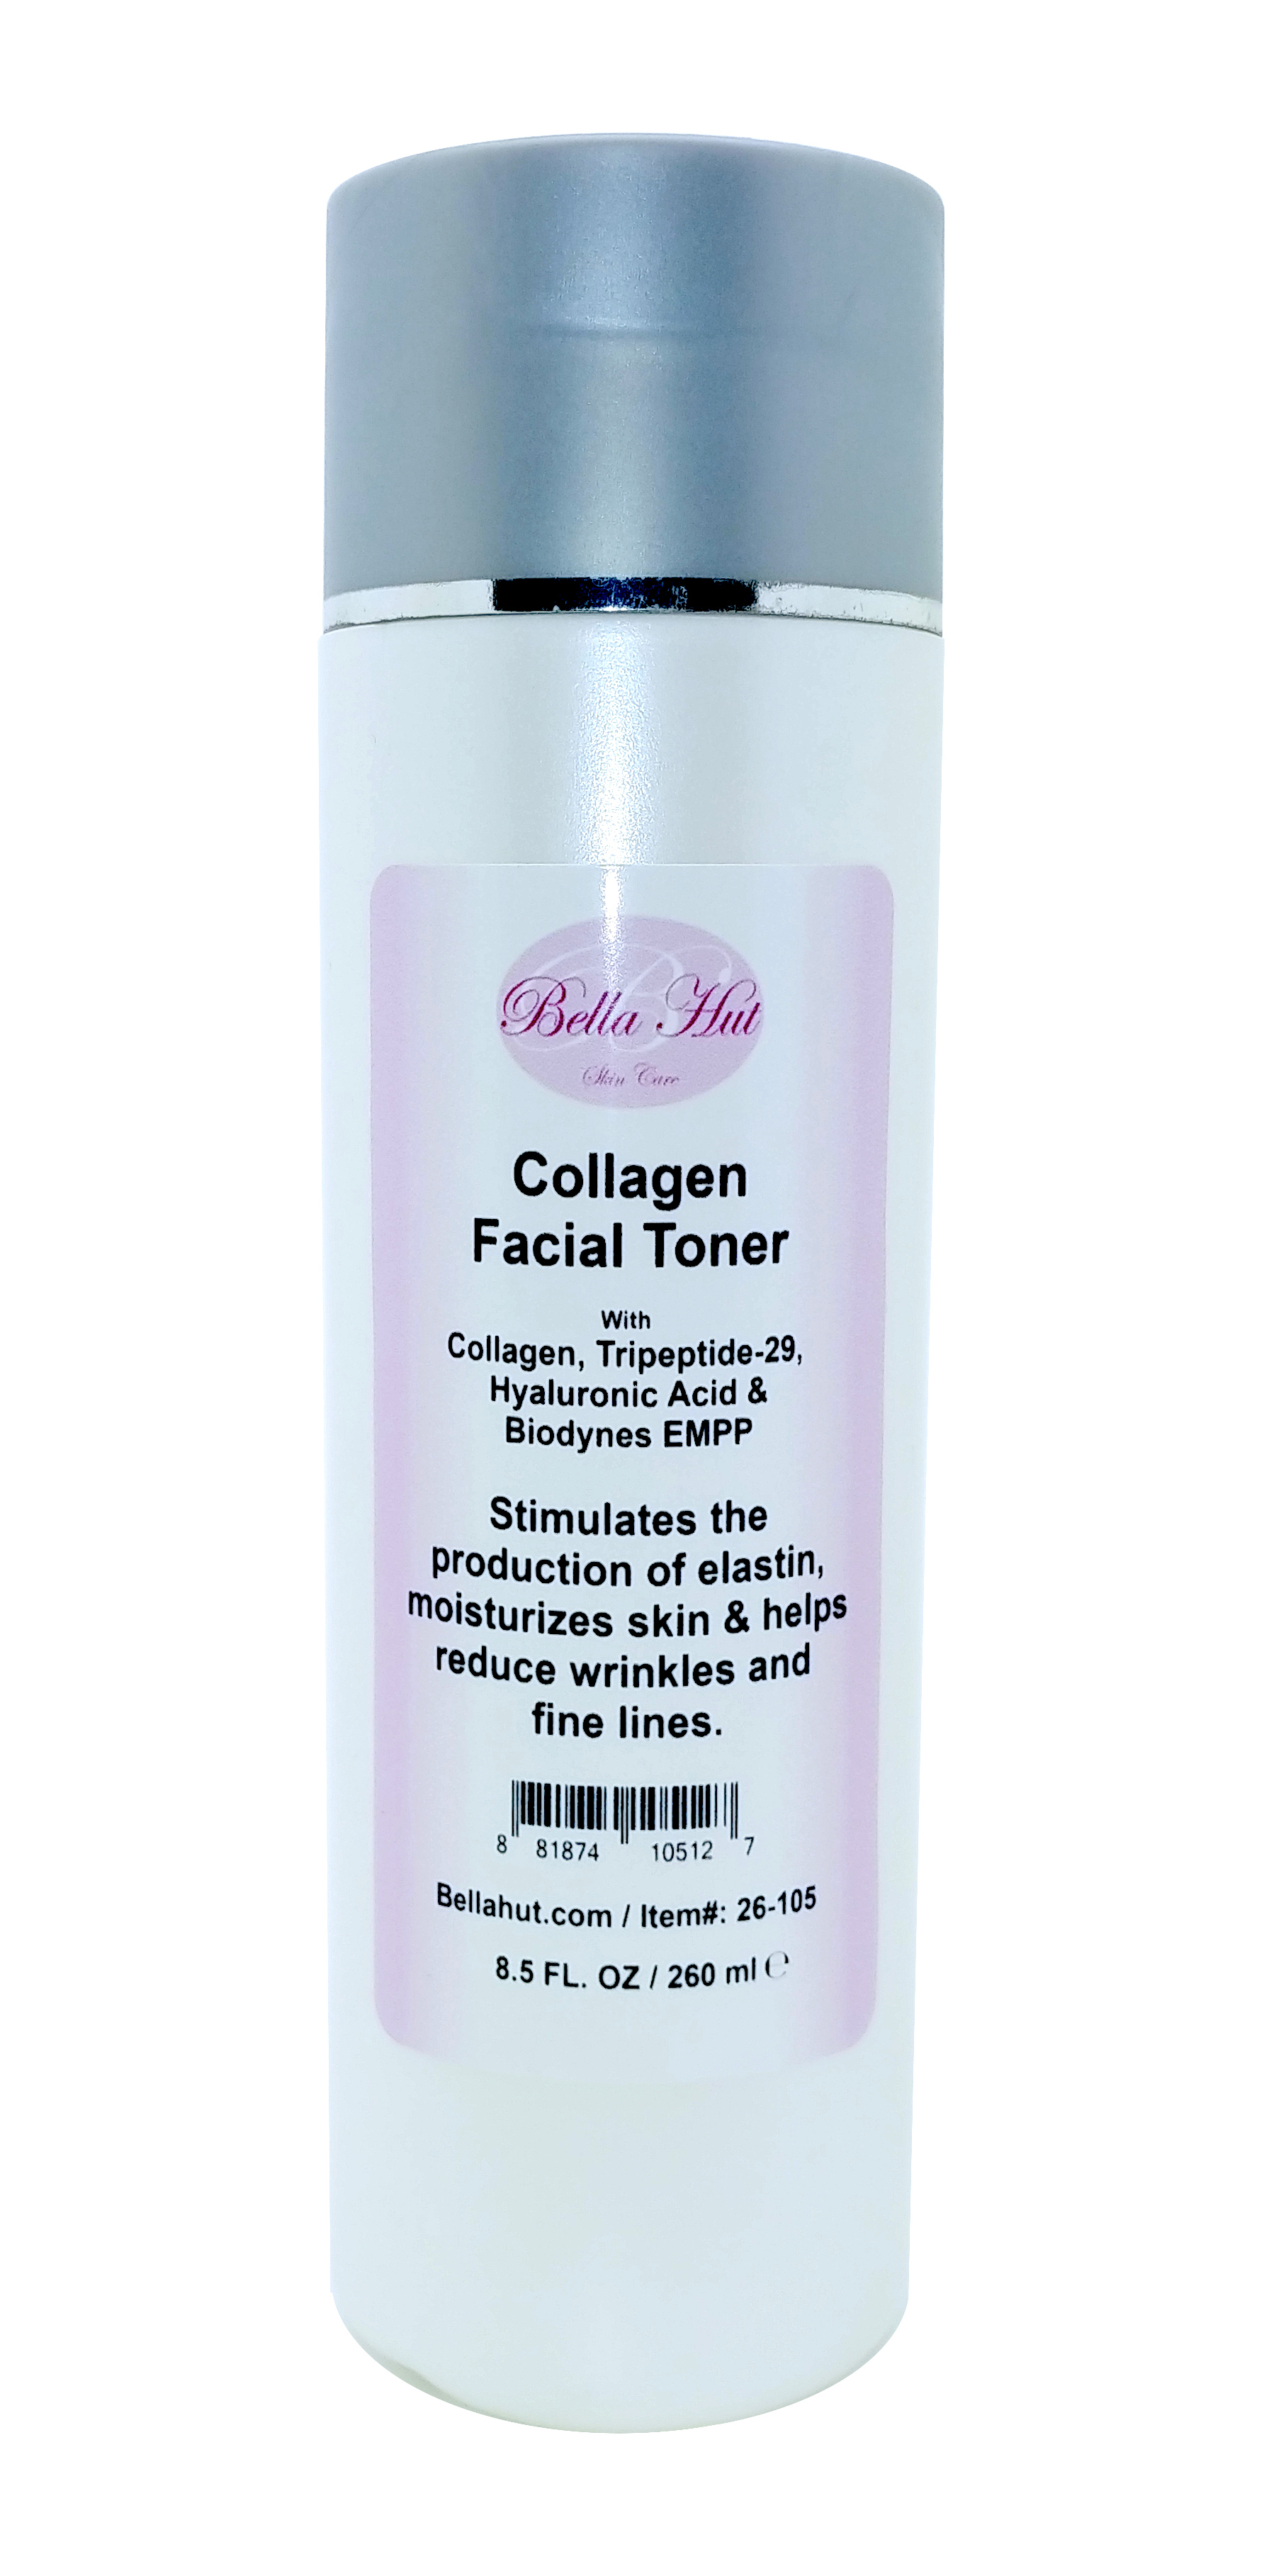 Collagen Facial Toner with Collagen, Biodynes, EMPP, Tripeptide-29 And Hyaluronic Acid that stimulates collagen